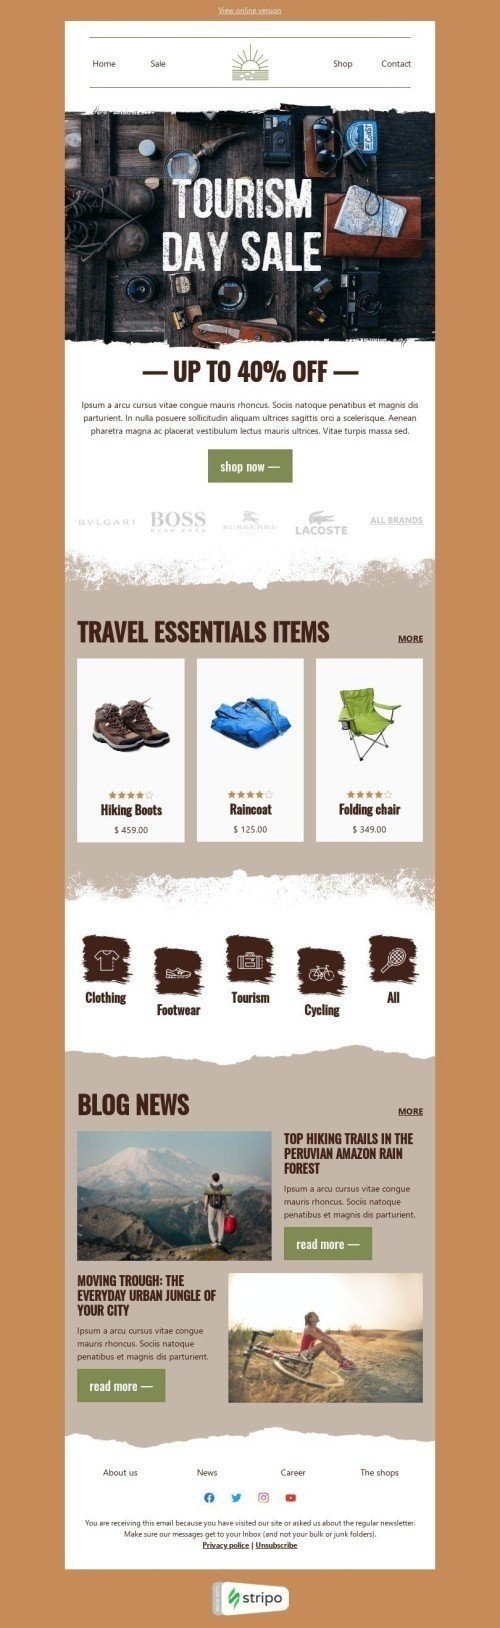 World Tourism Day Email Template «Travel essentials items» for Travel industry mobile view